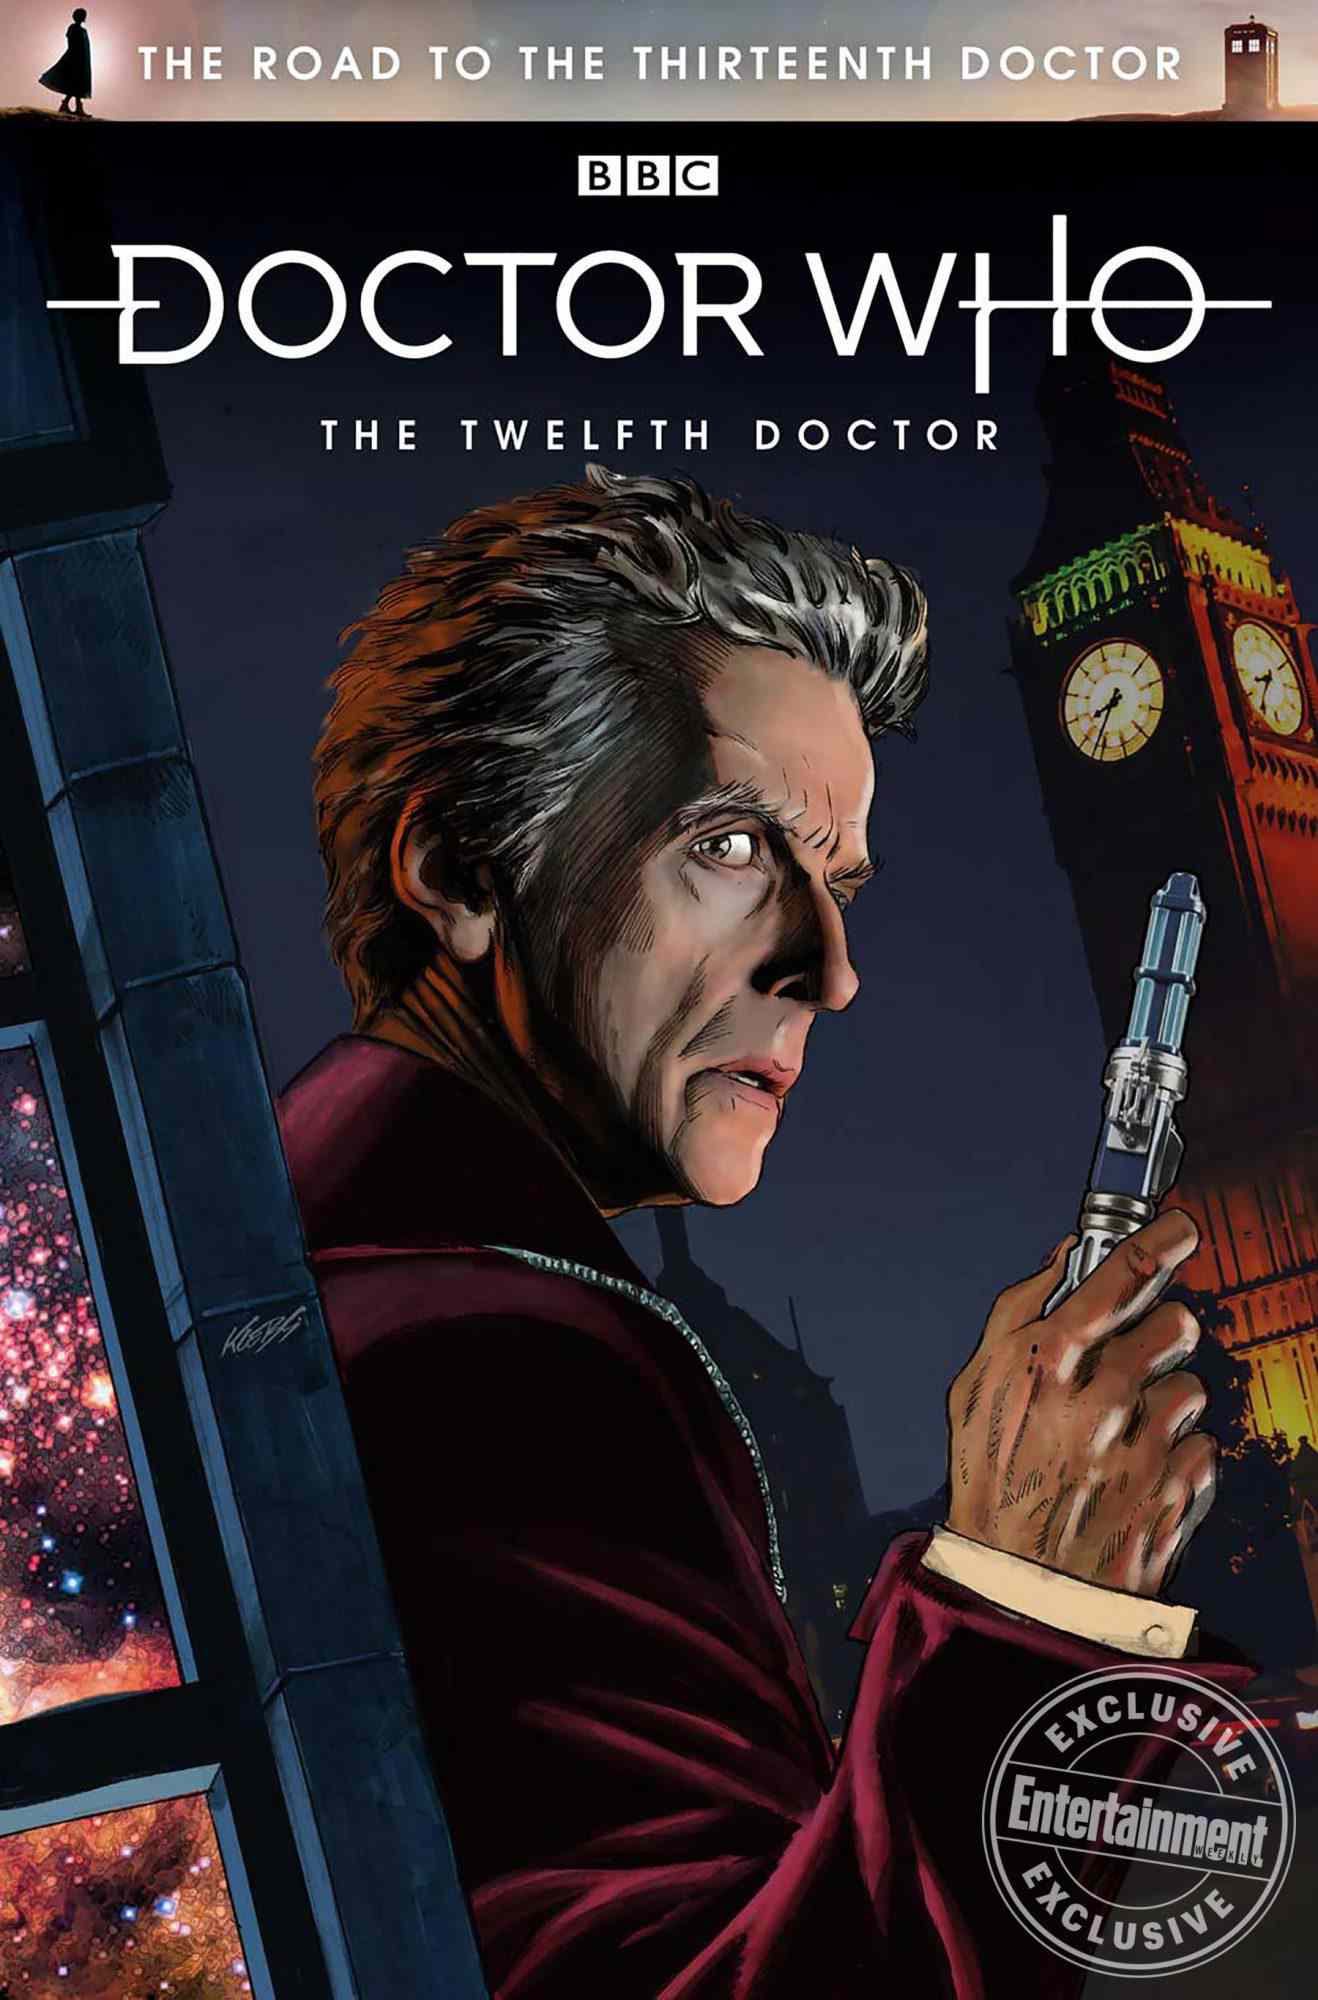 The Road to the Thirteenth Doctor CR: Titan Comics and BBC Studios